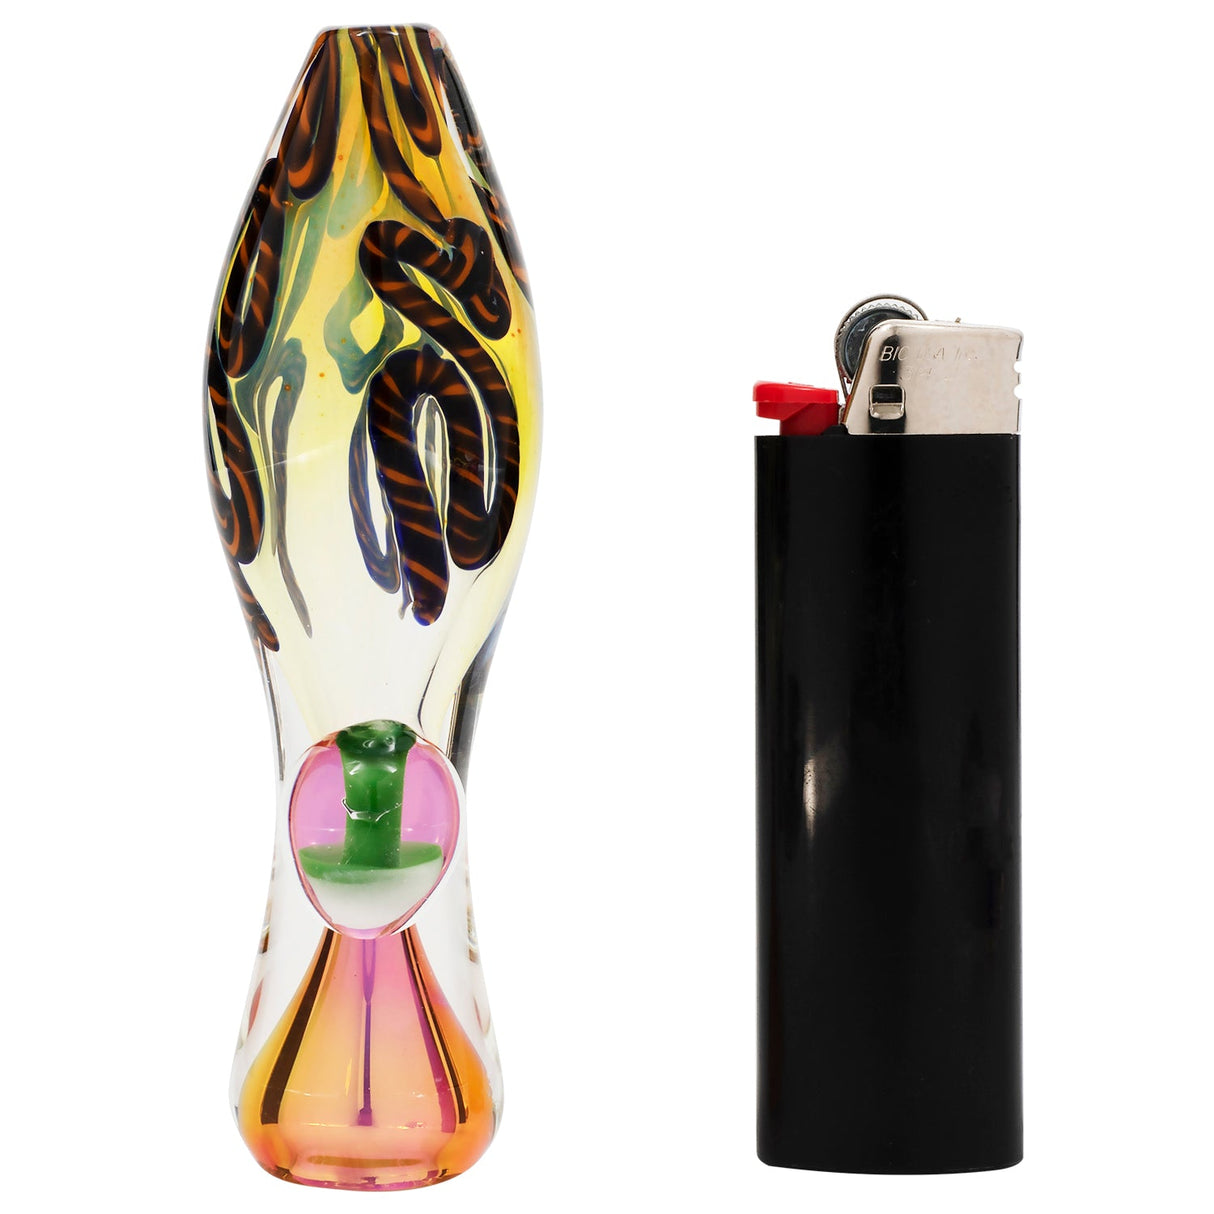 LA Pipes "Fun-Guy" Glass Chillum front view with fumed color changing design, next to a lighter for scale